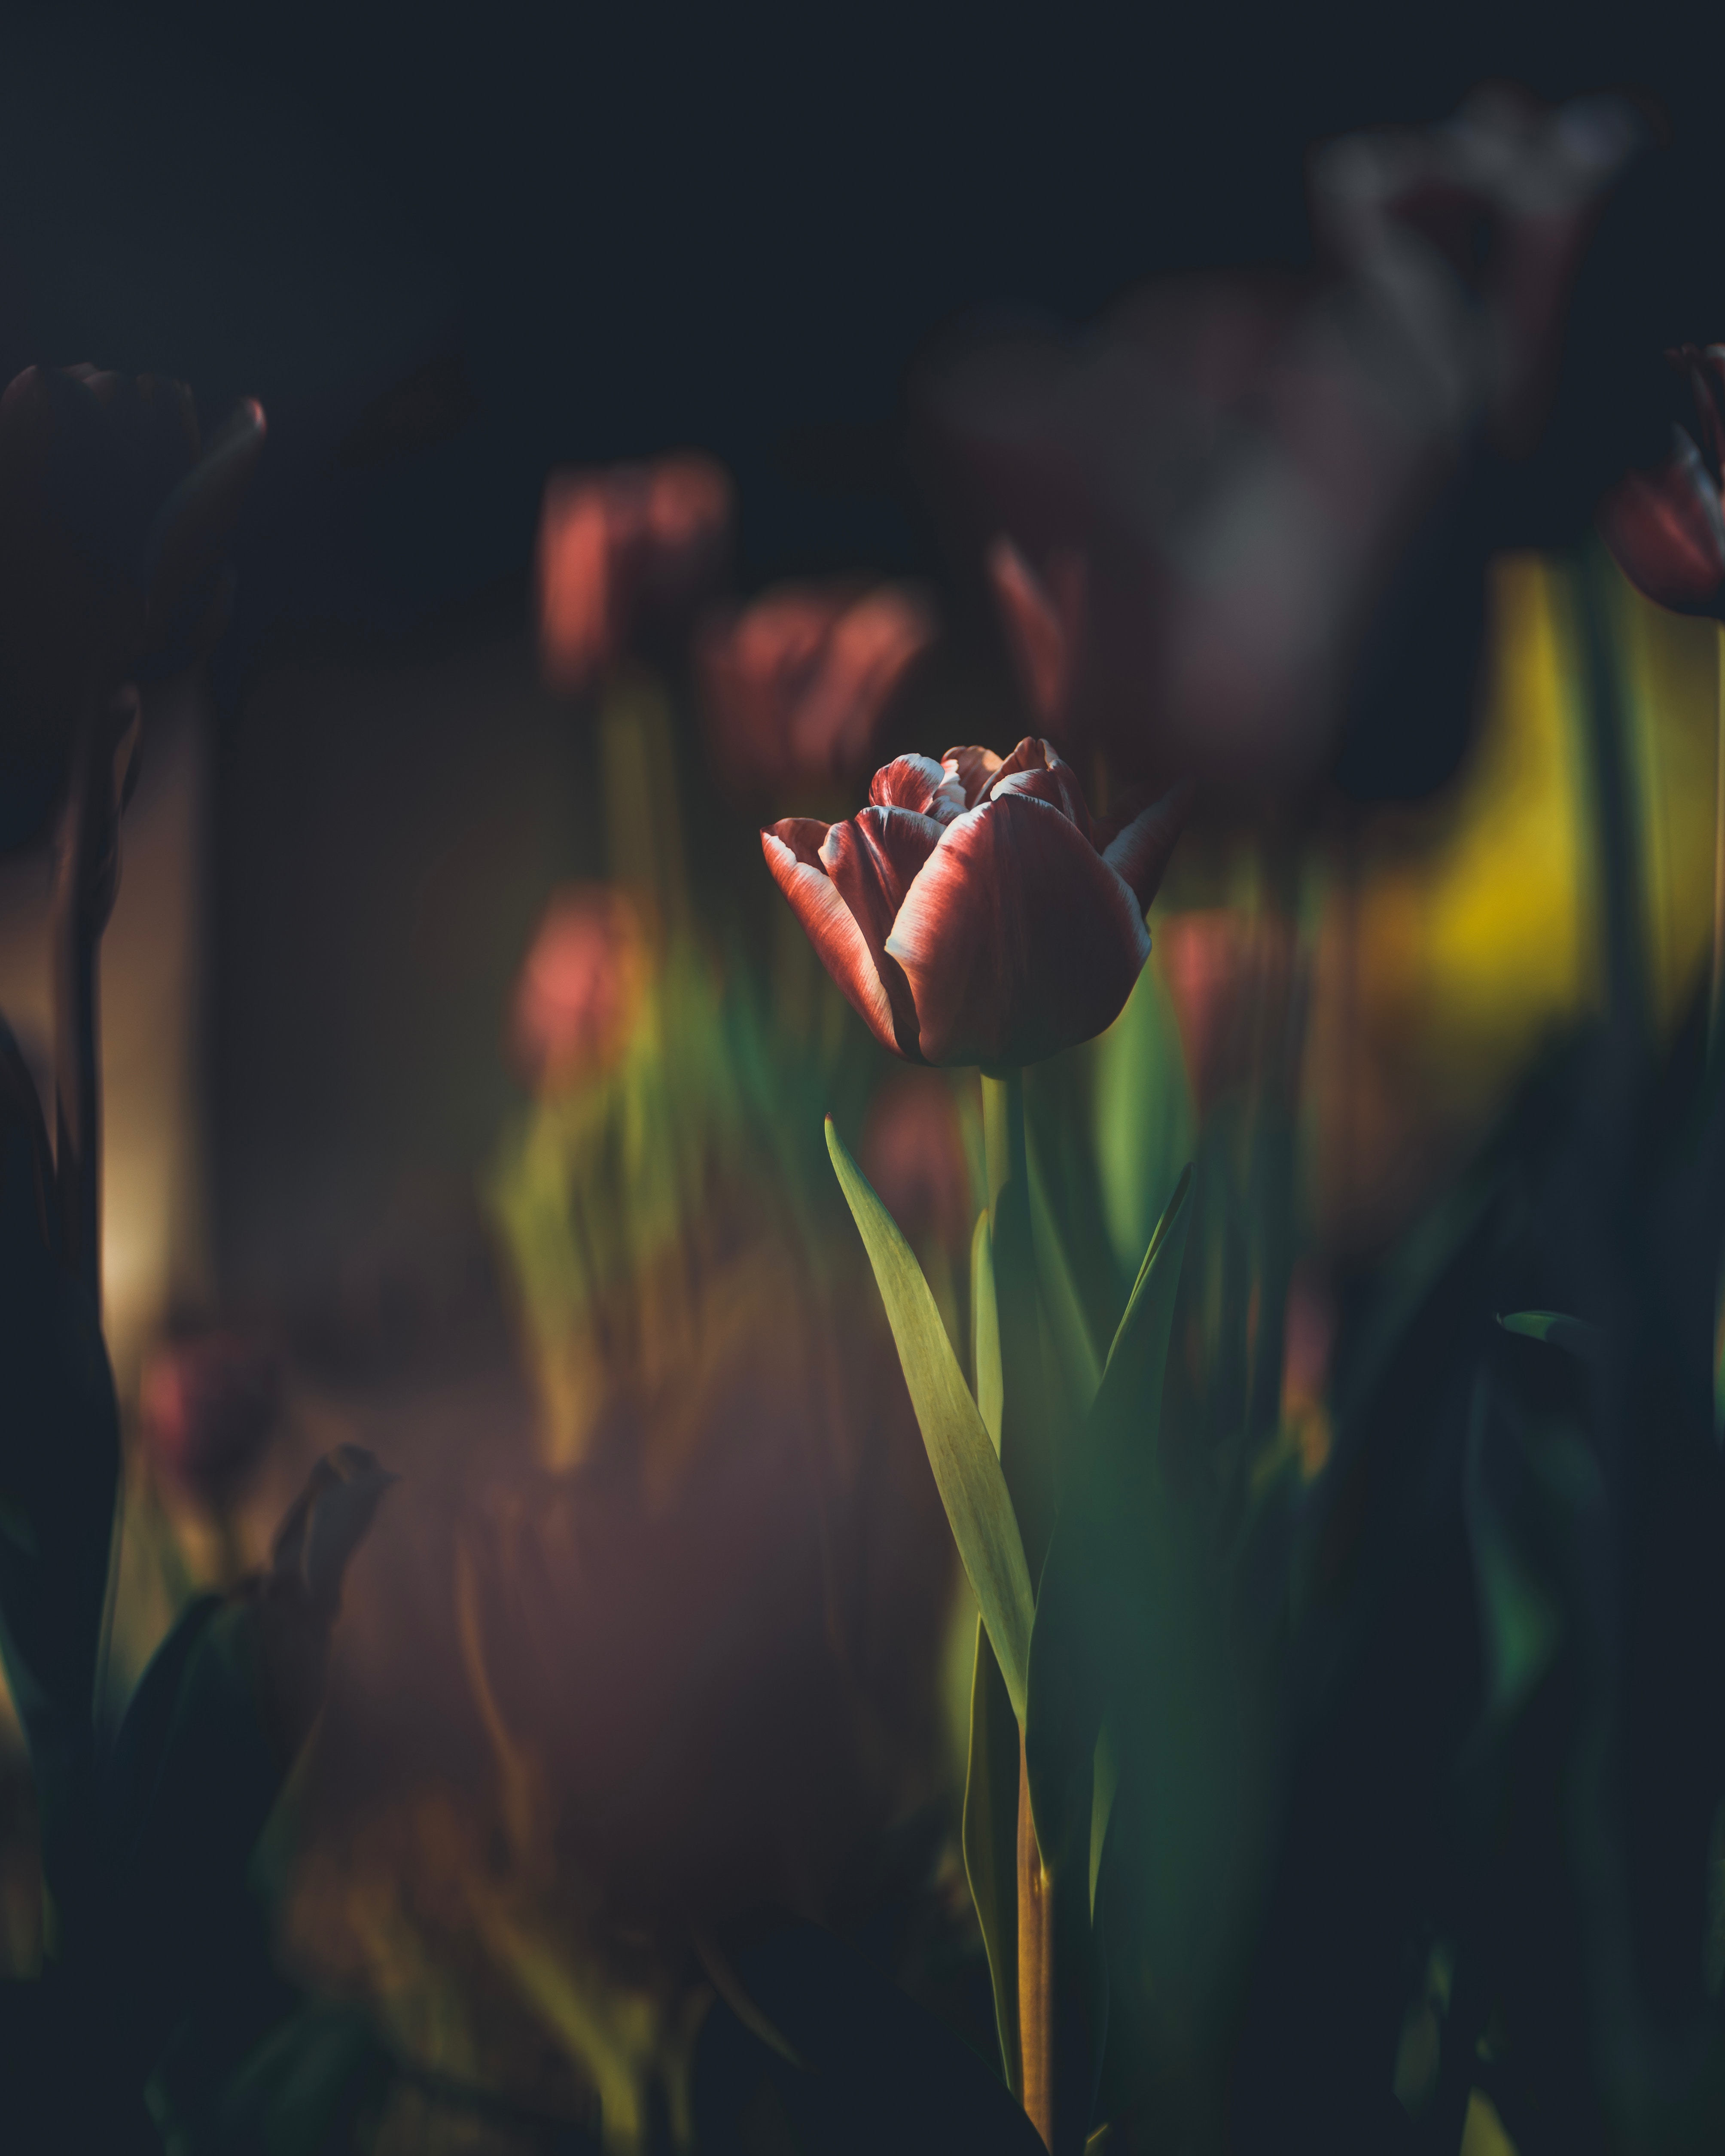 106985 download wallpaper flowers, bud, blur, smooth, tulip, stem, stalk screensavers and pictures for free